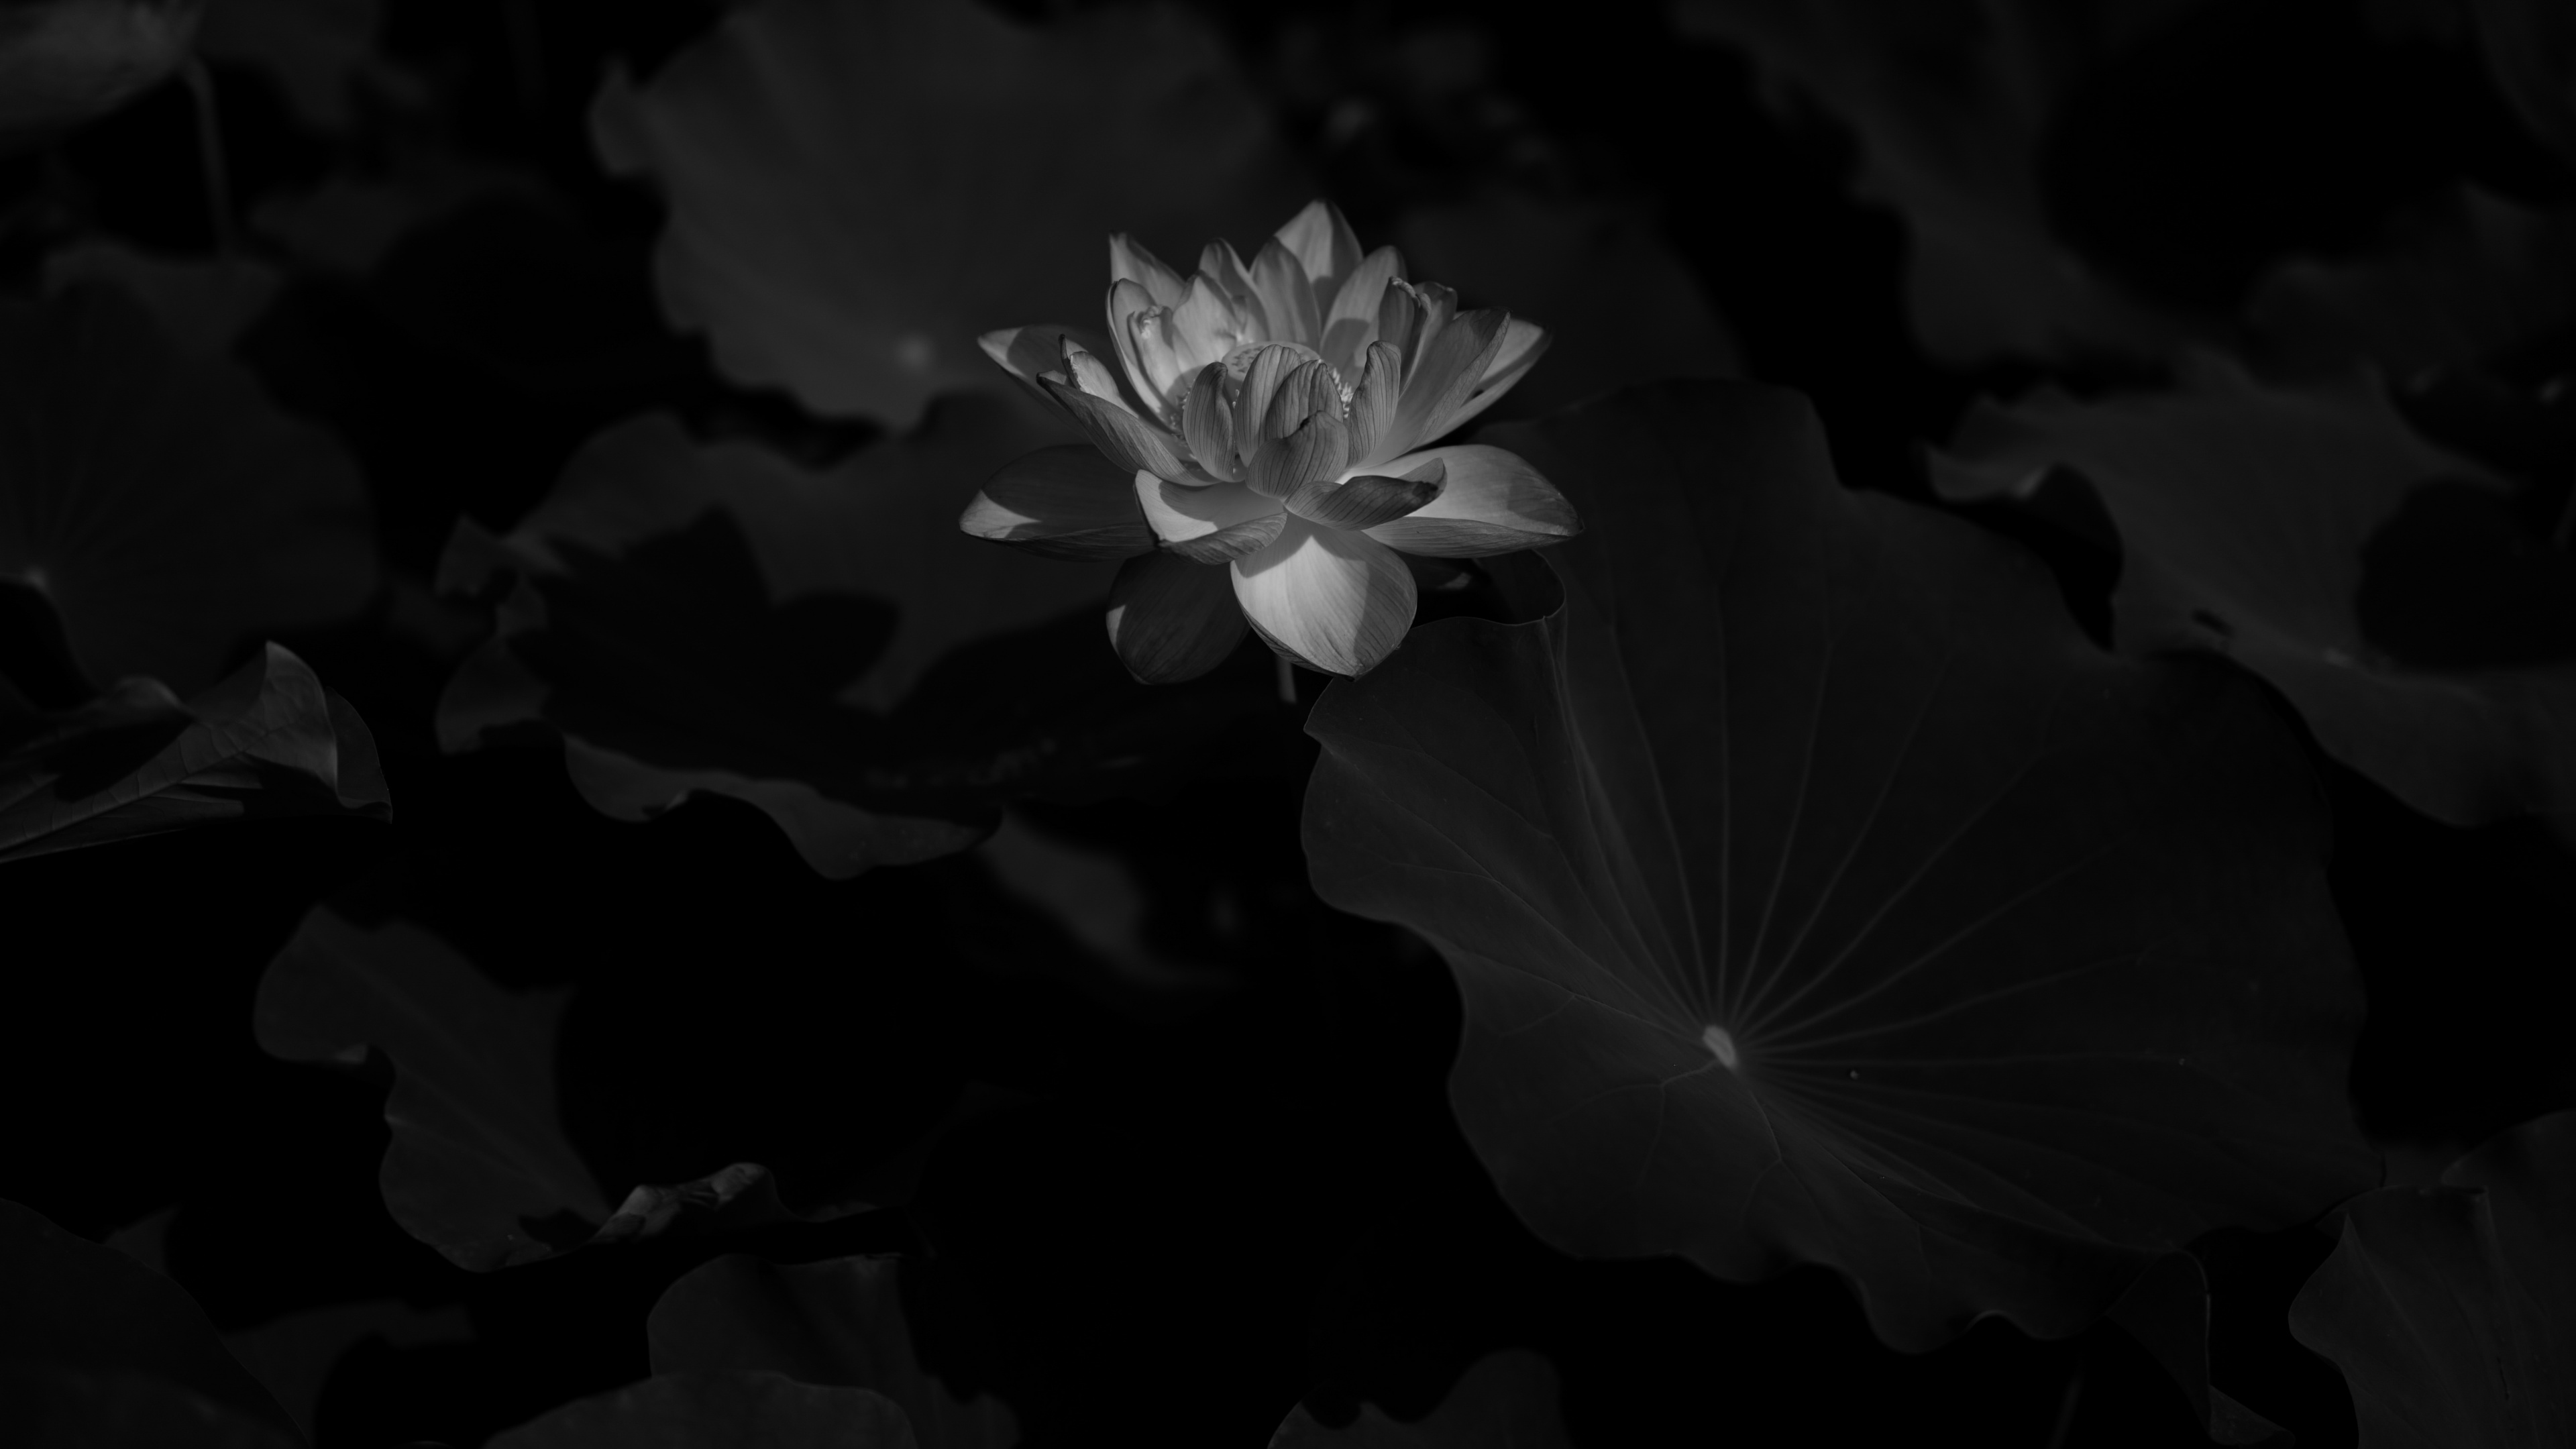 Grayscale Photo of a Flower. Wallpaper in 3840x2160 Resolution